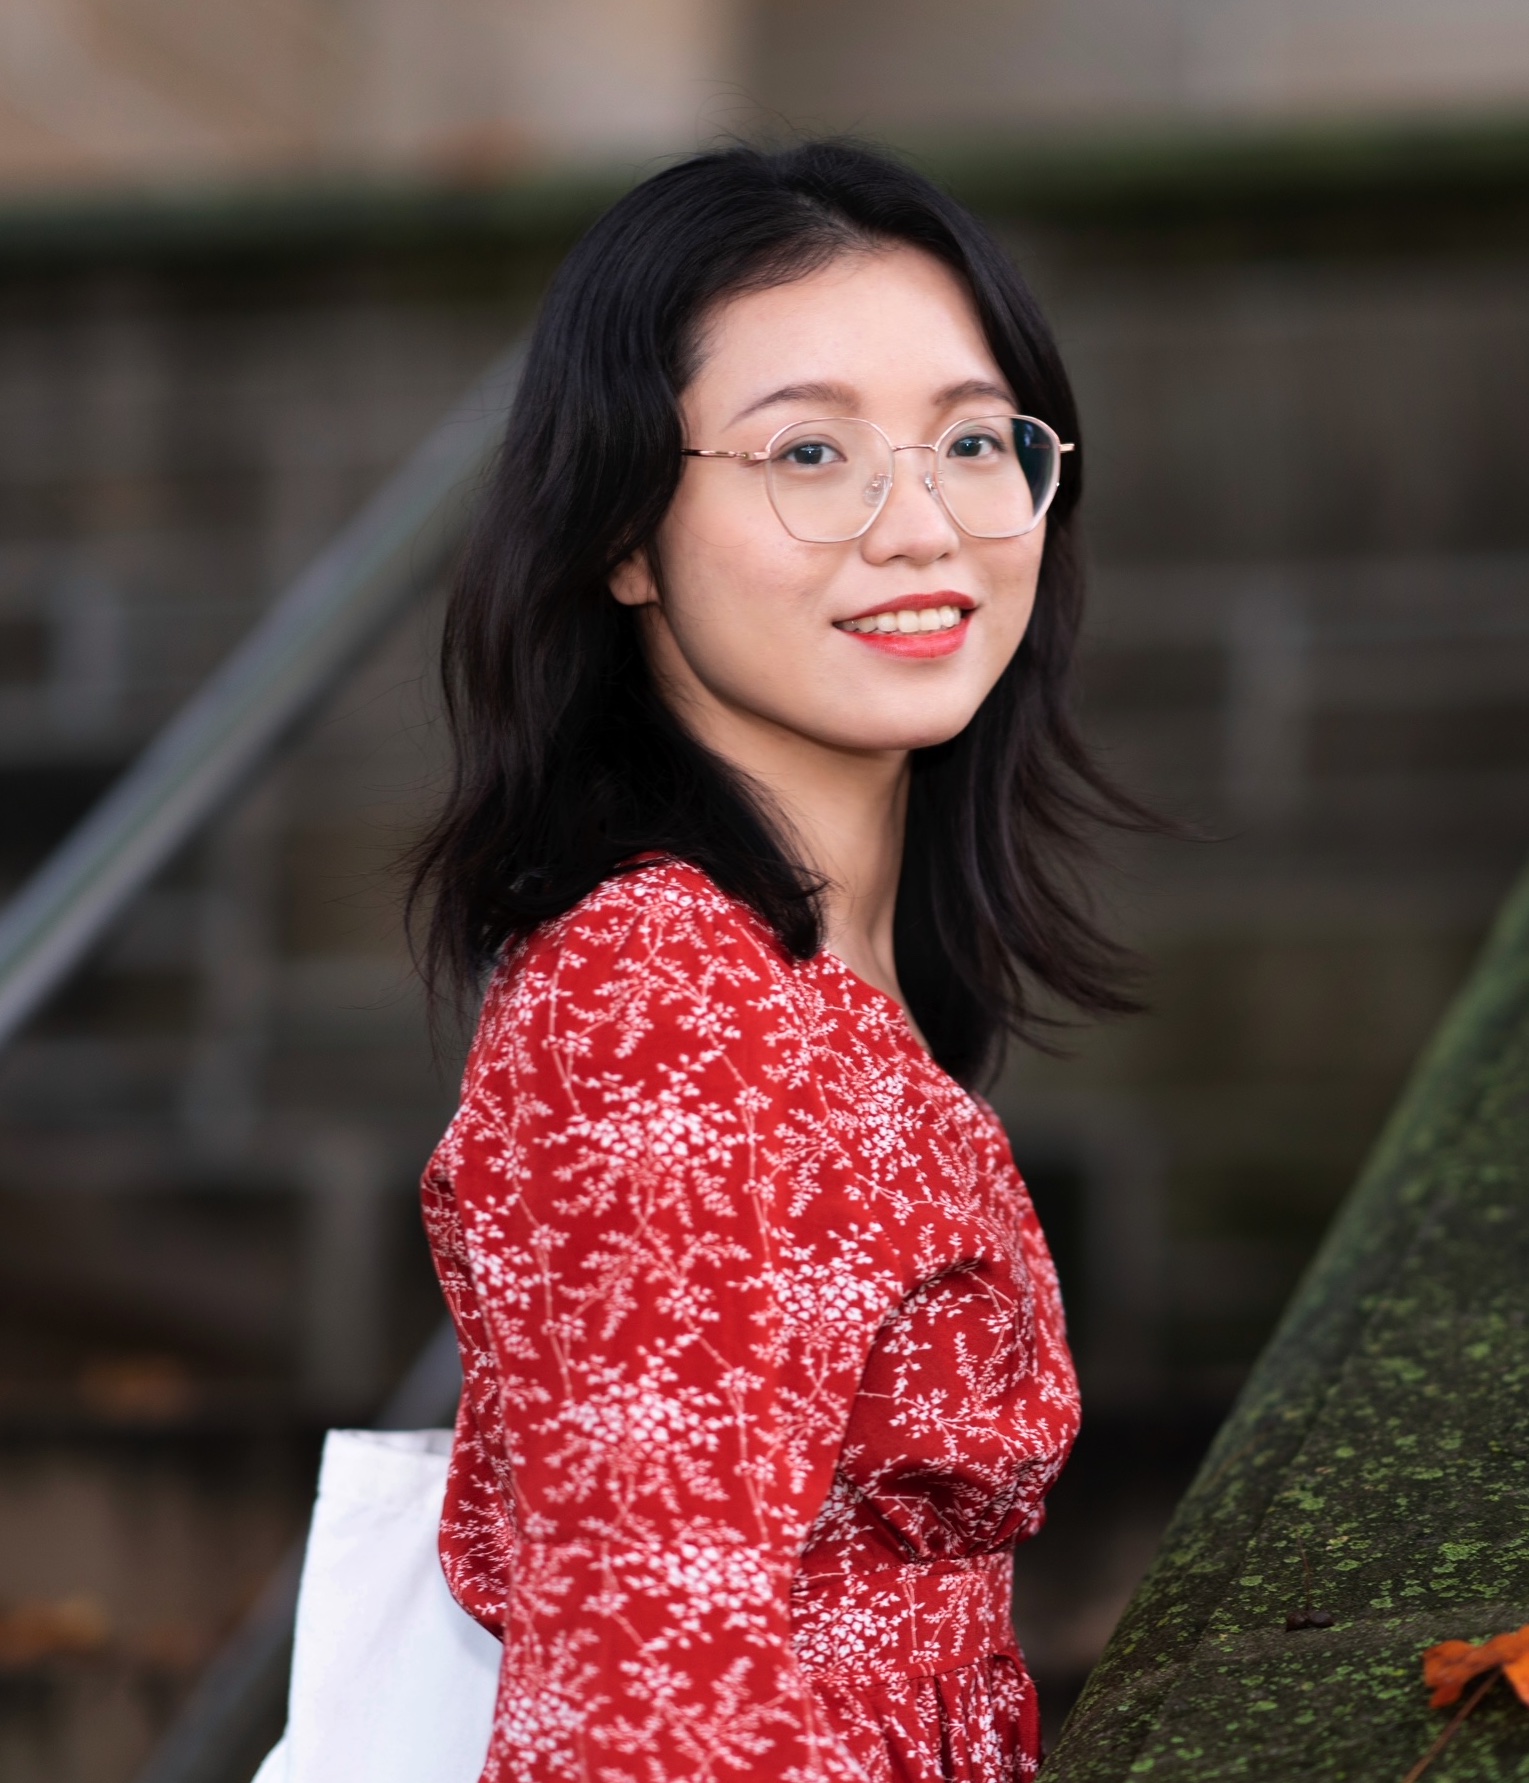 A picture of Yu Mo wearing a red blouse and glasses.